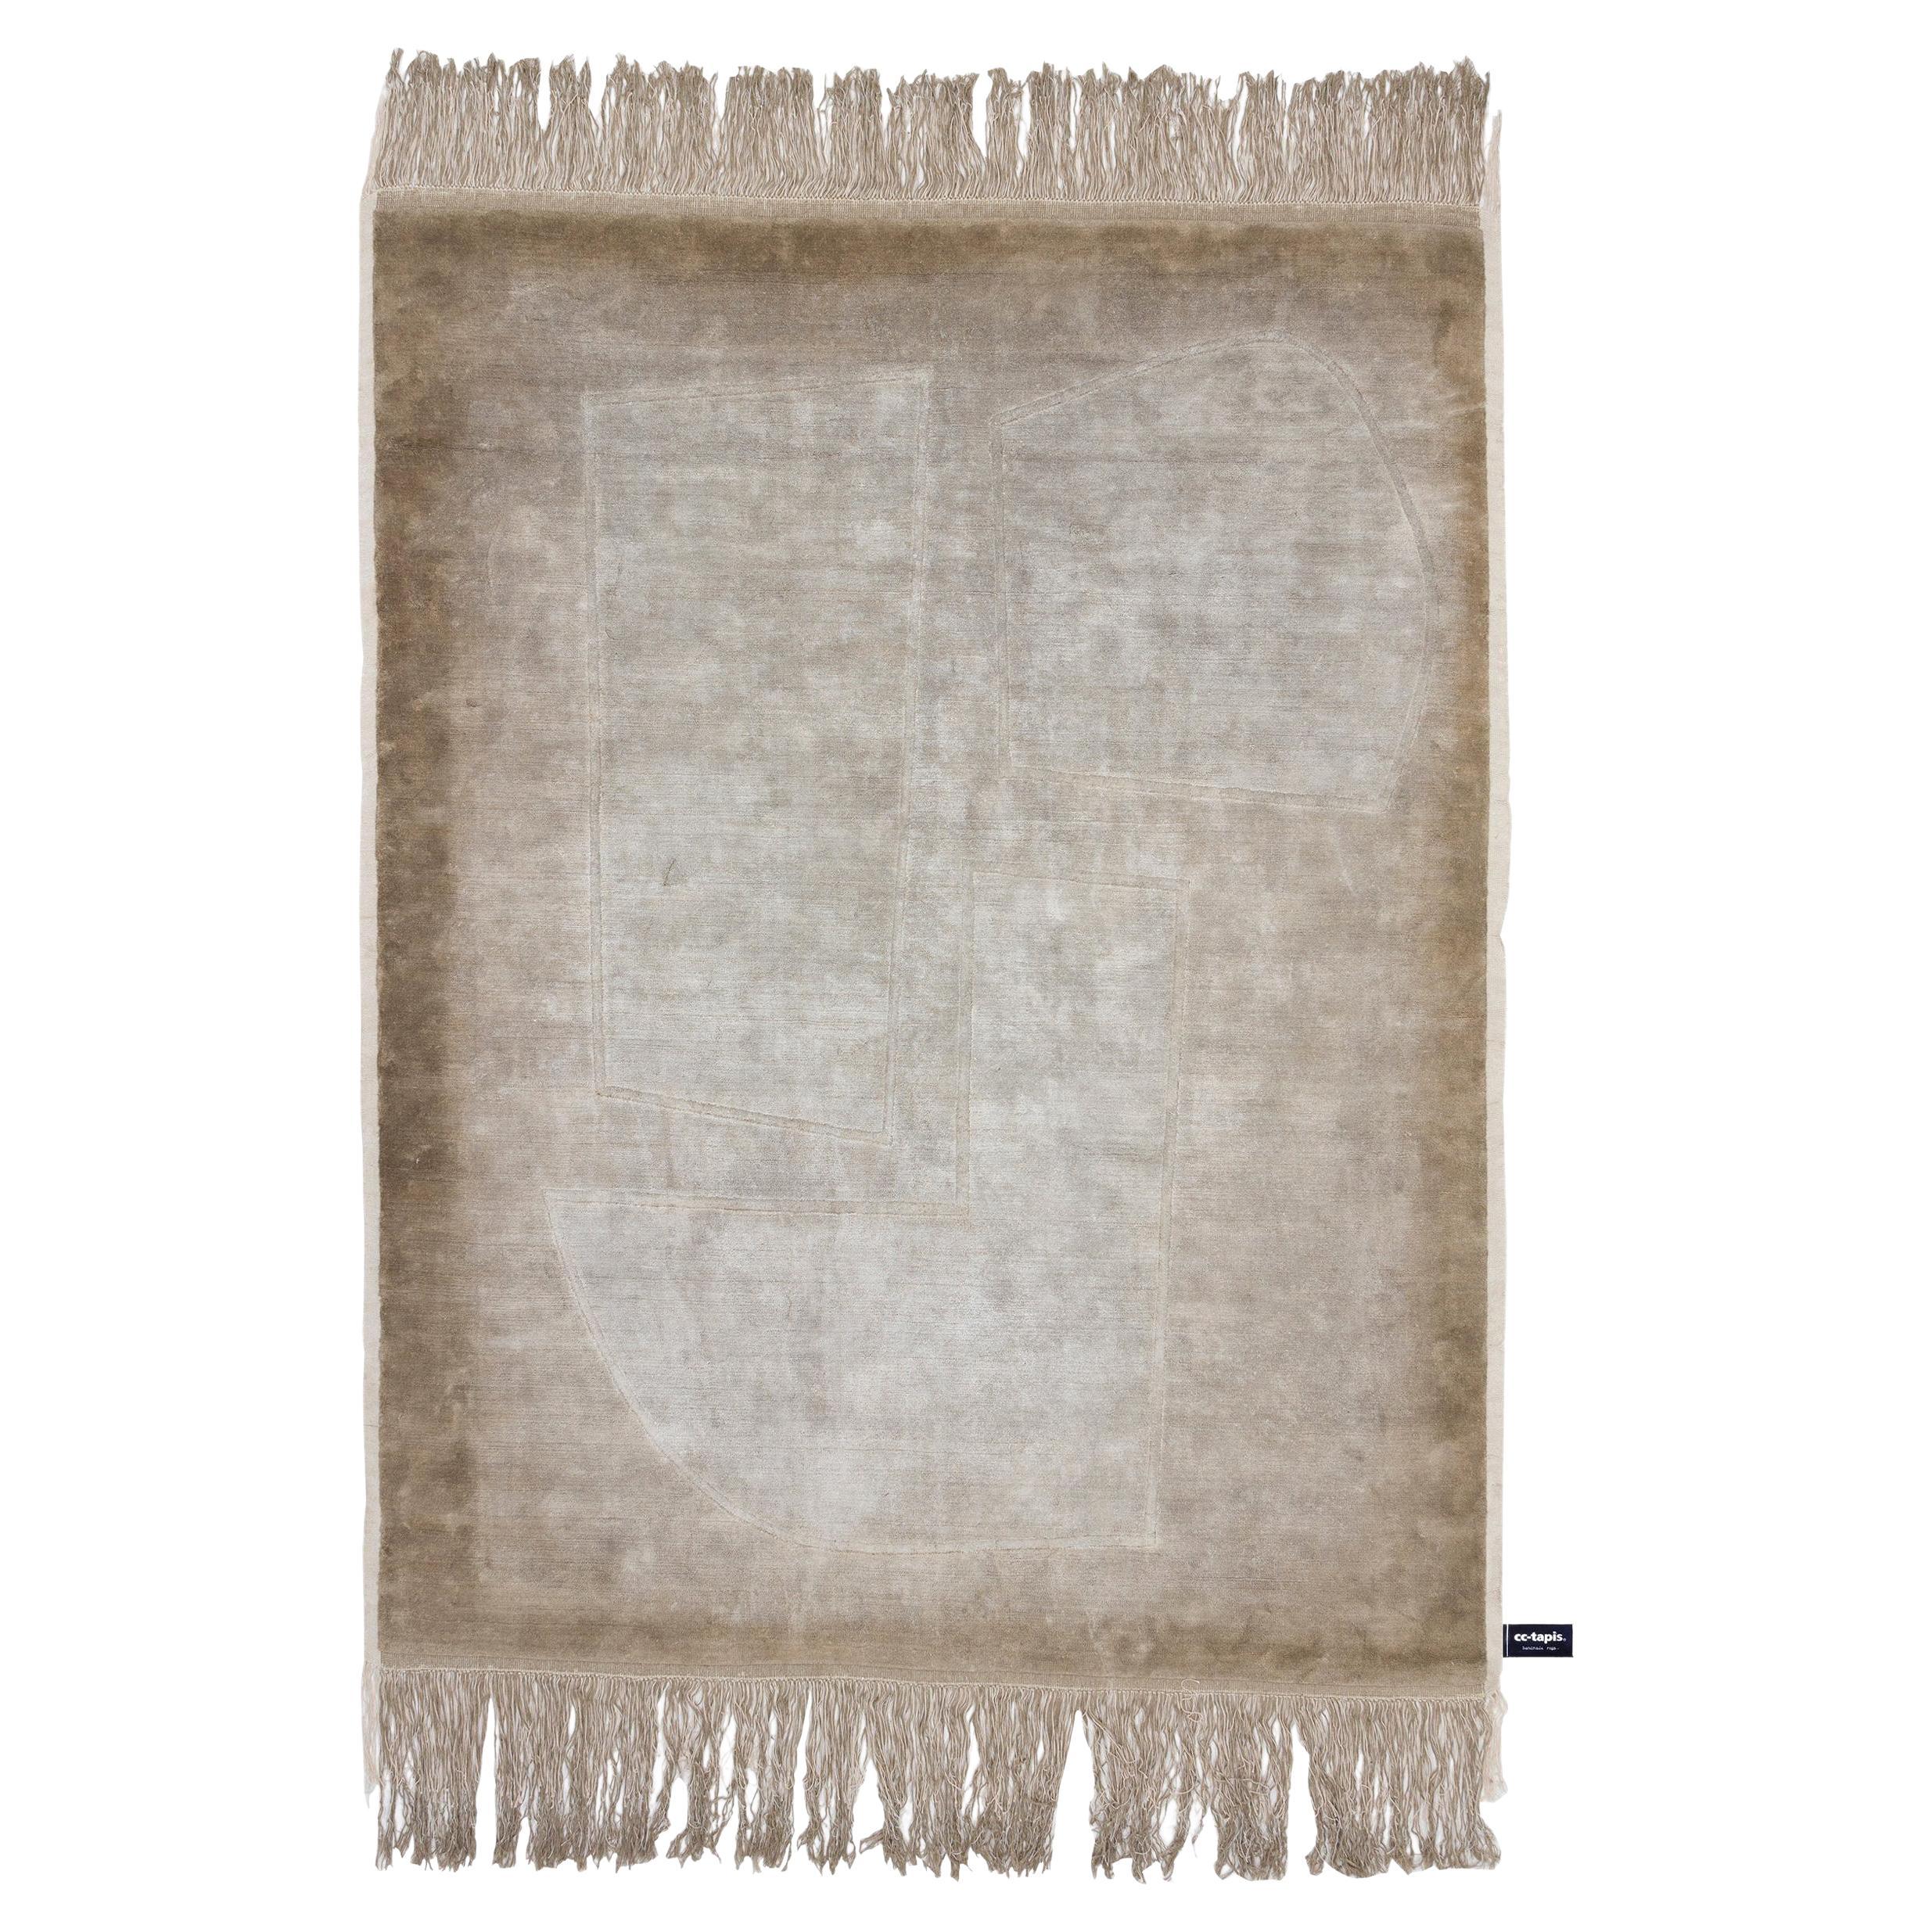 cc-tapis Inventory Patch Rug Raw by Faye Toogood - IN STOCK For Sale